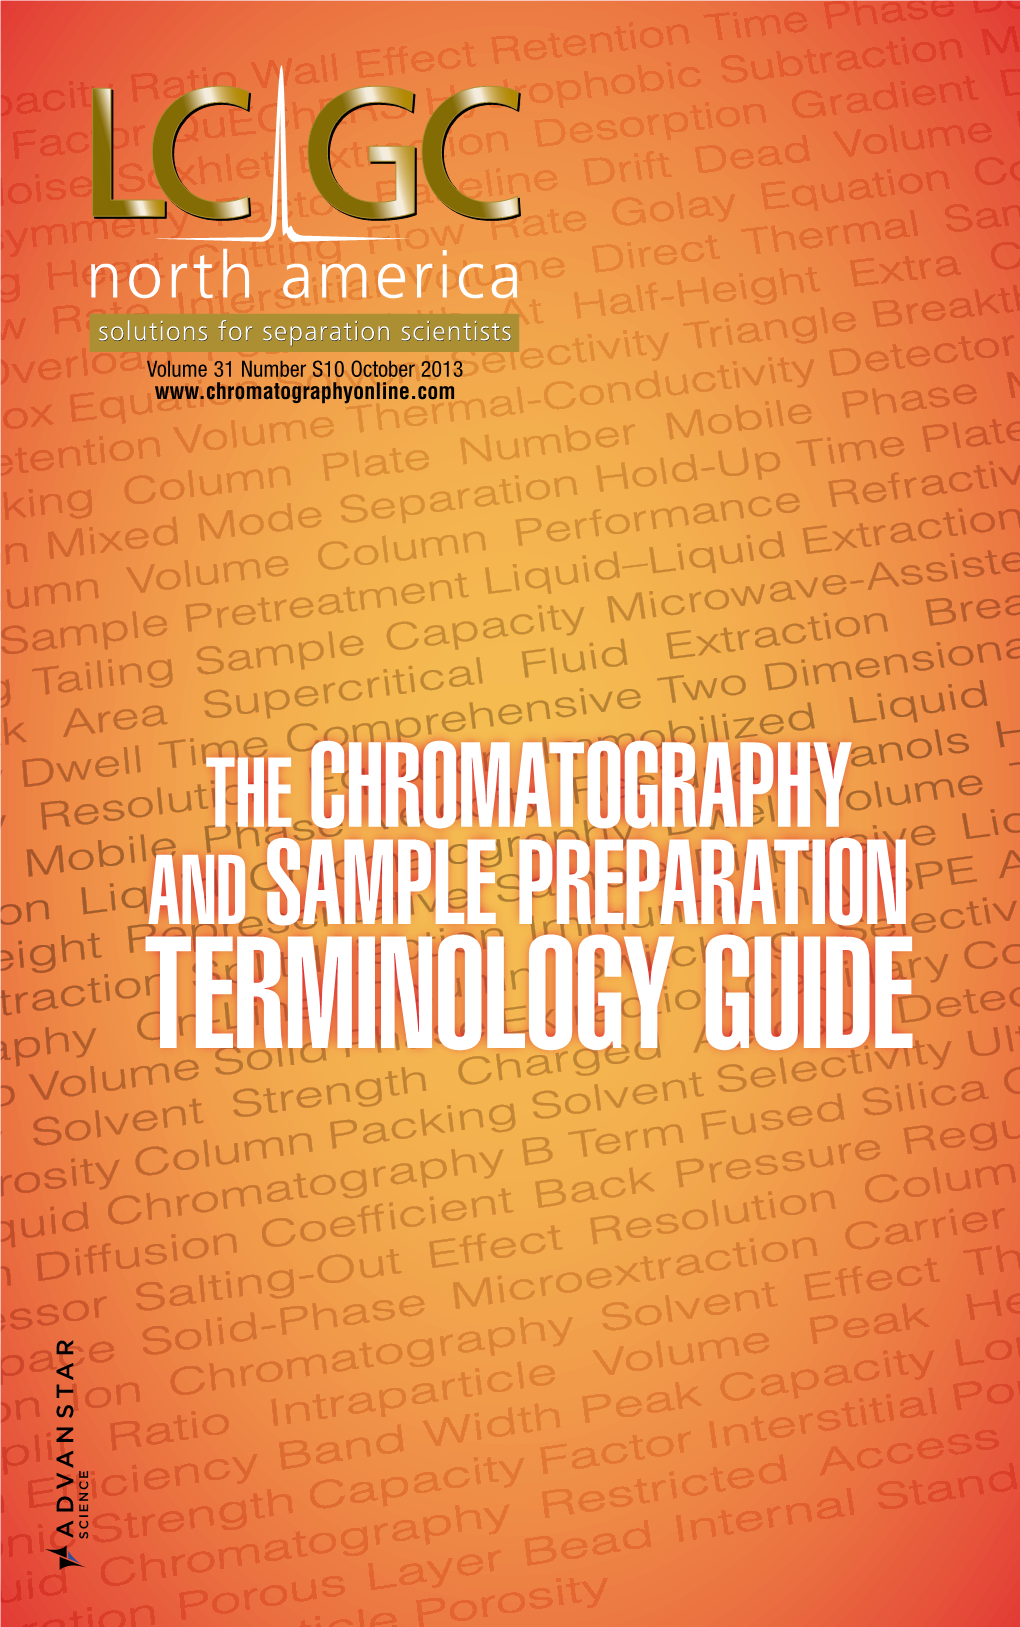 The Chromatography and Sample Preparation Terminology Guide